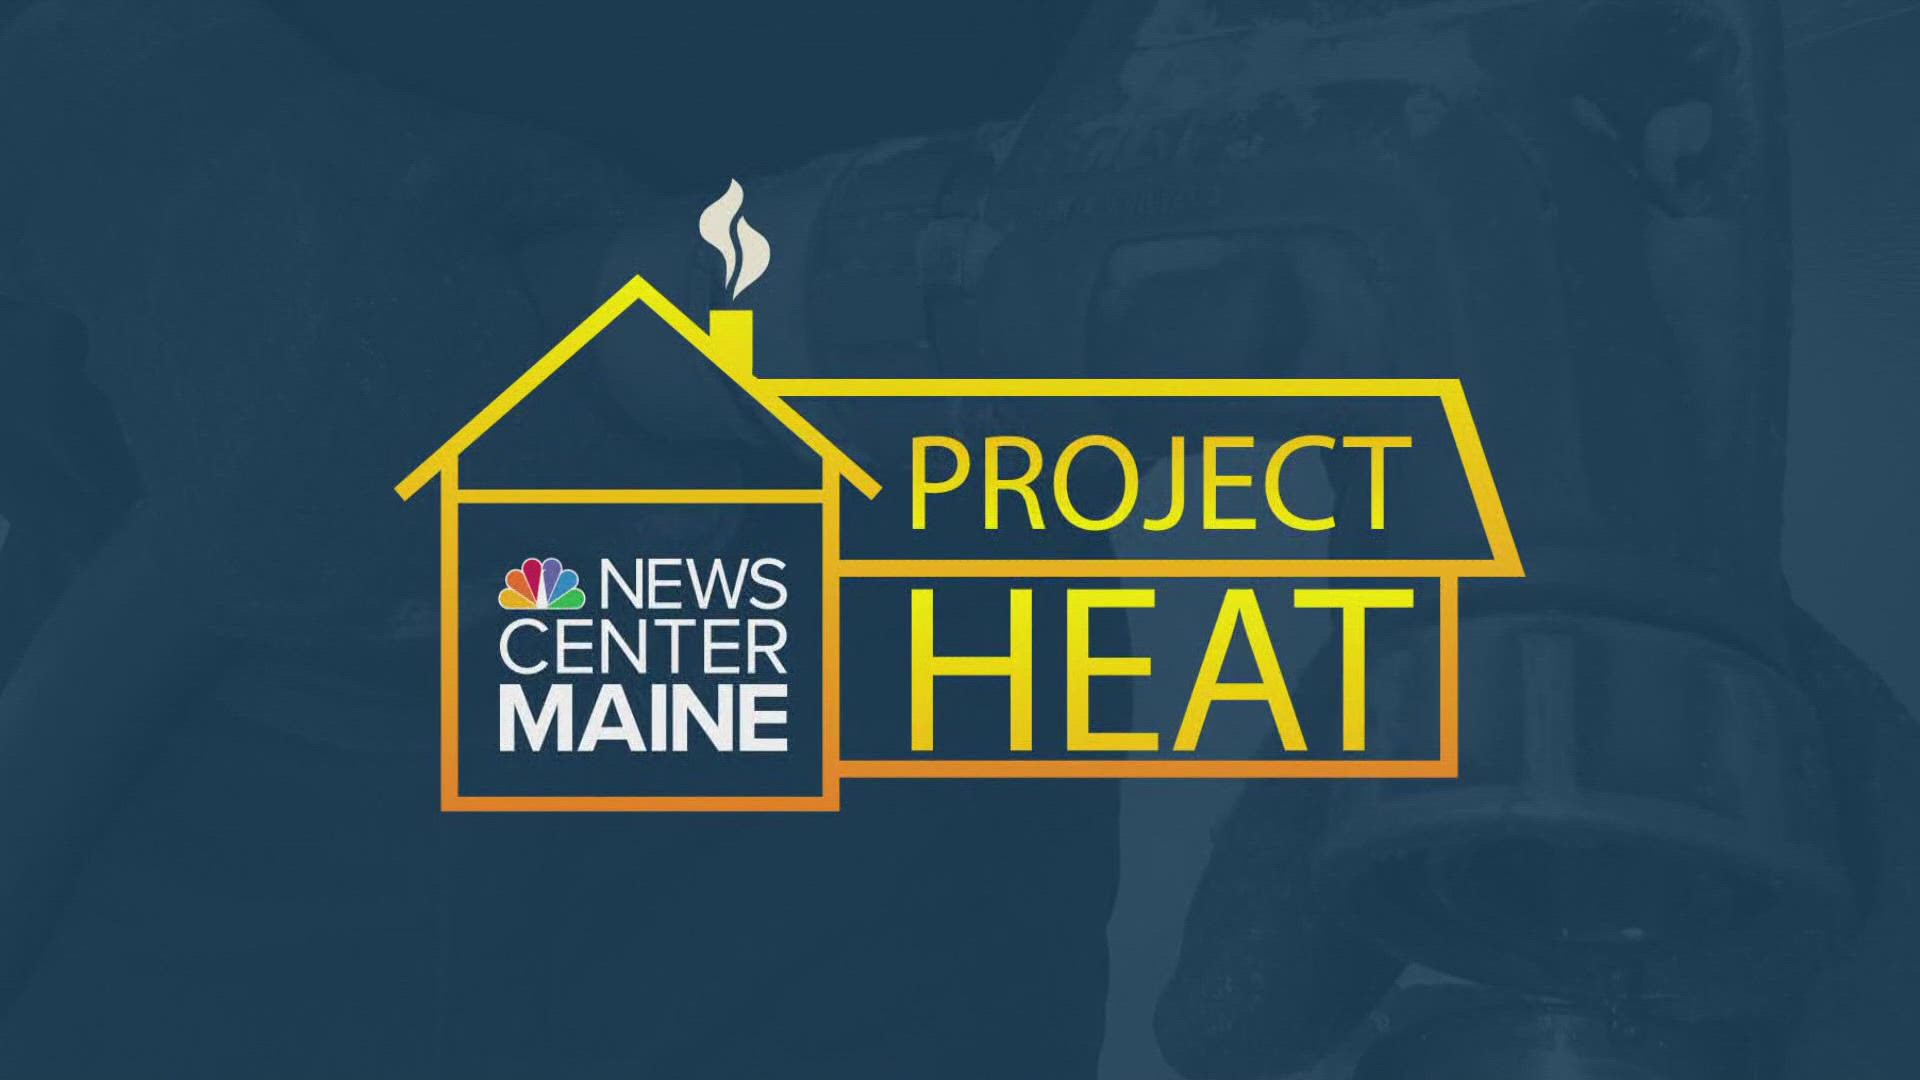 According to United Ways of Maine, this money alone will help heat more than 1,200 homes with at least 100 gallons of fuel as we enter the heart of the winter season